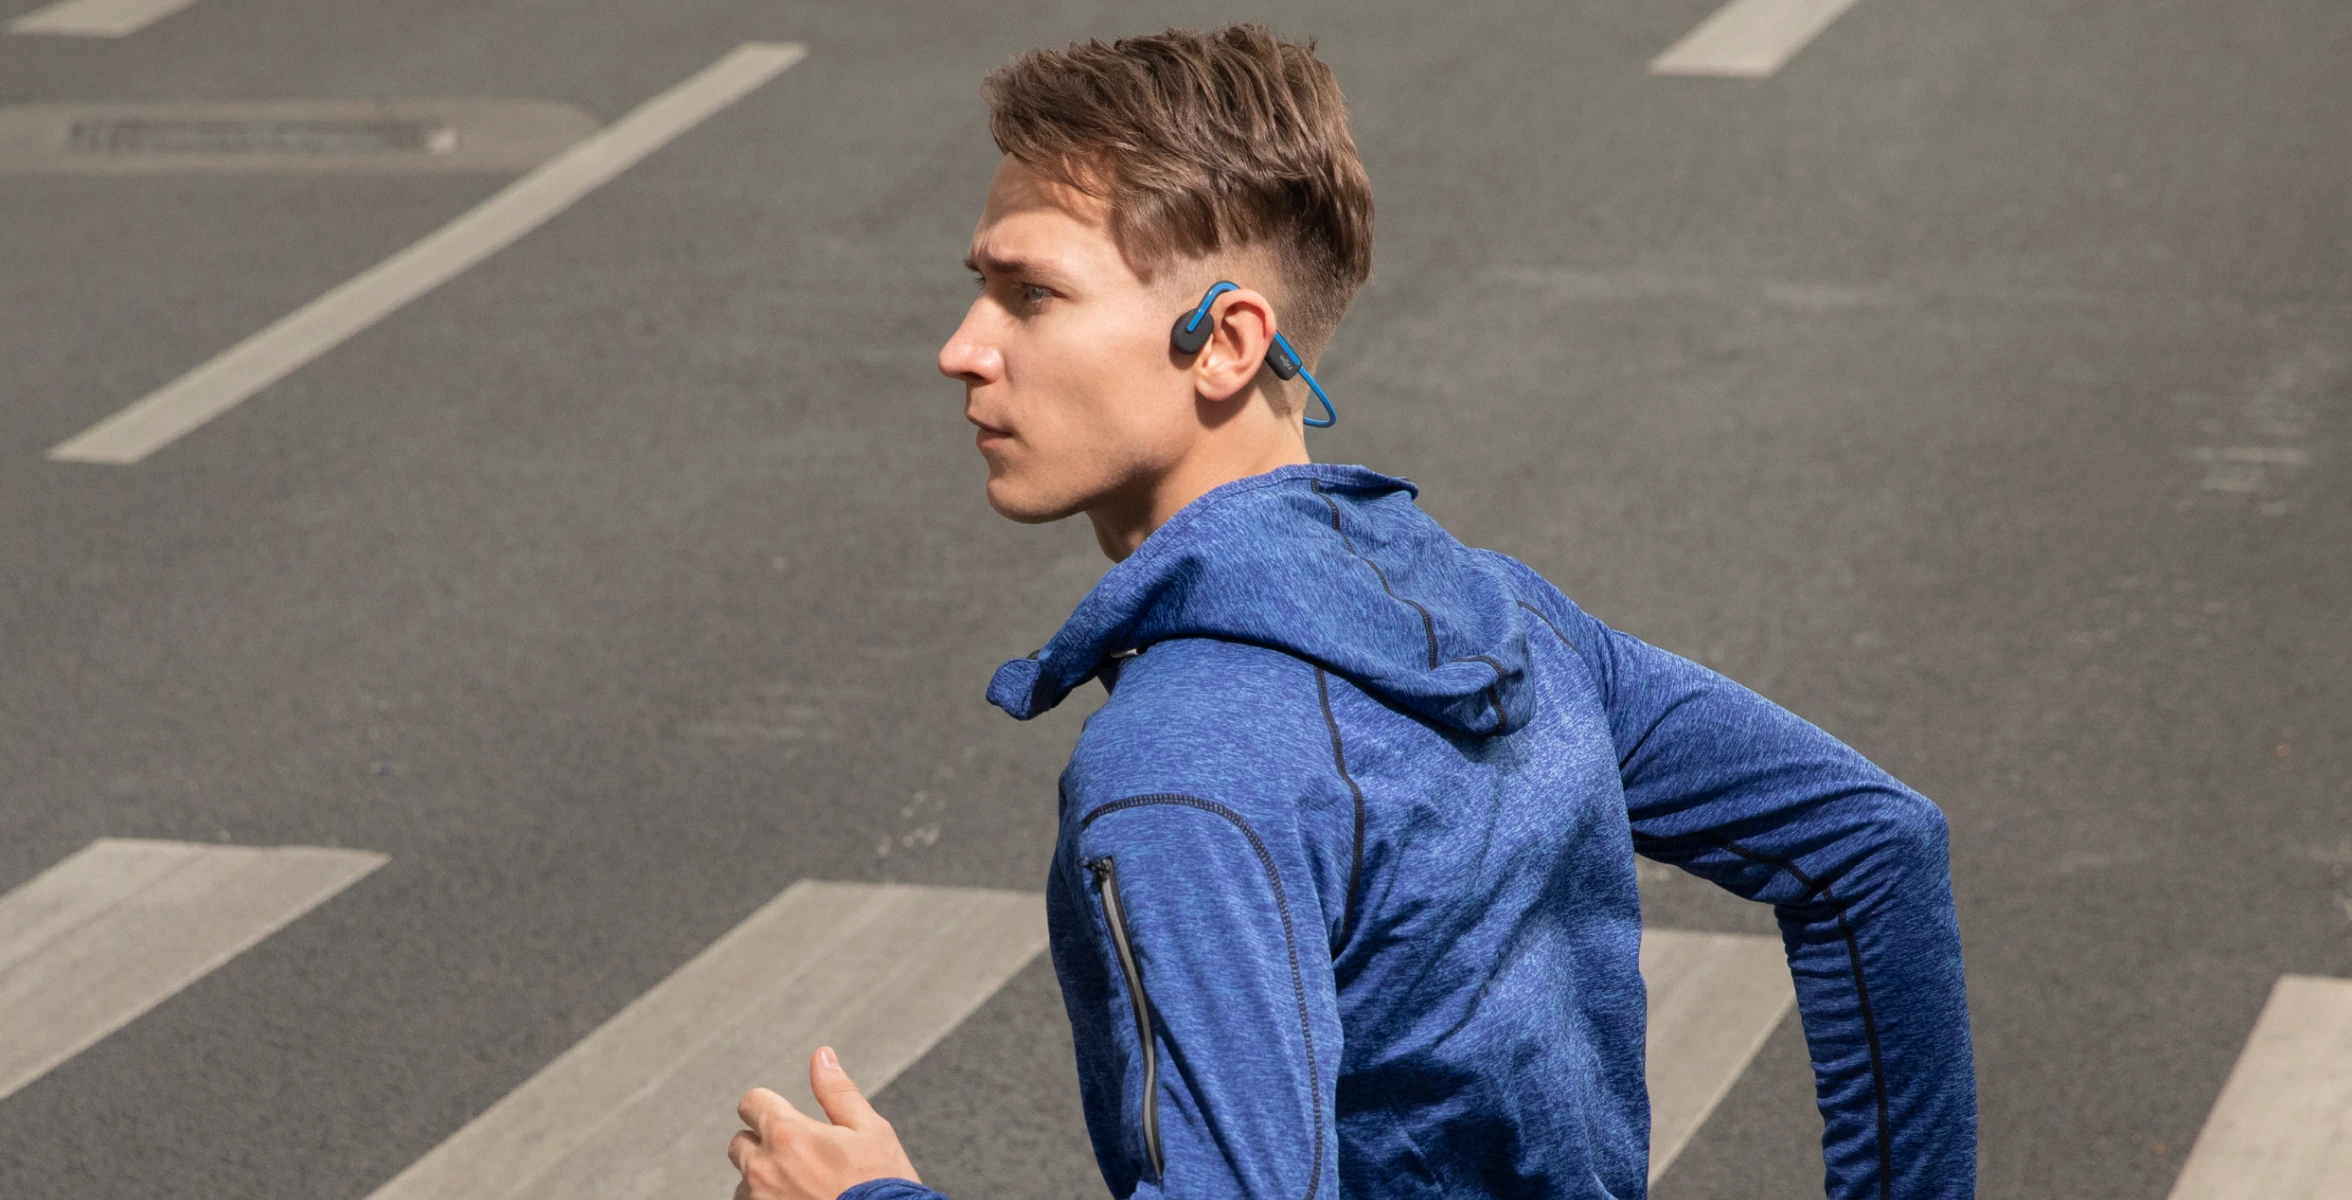 maintain situational awareness and safety with jogging headphones